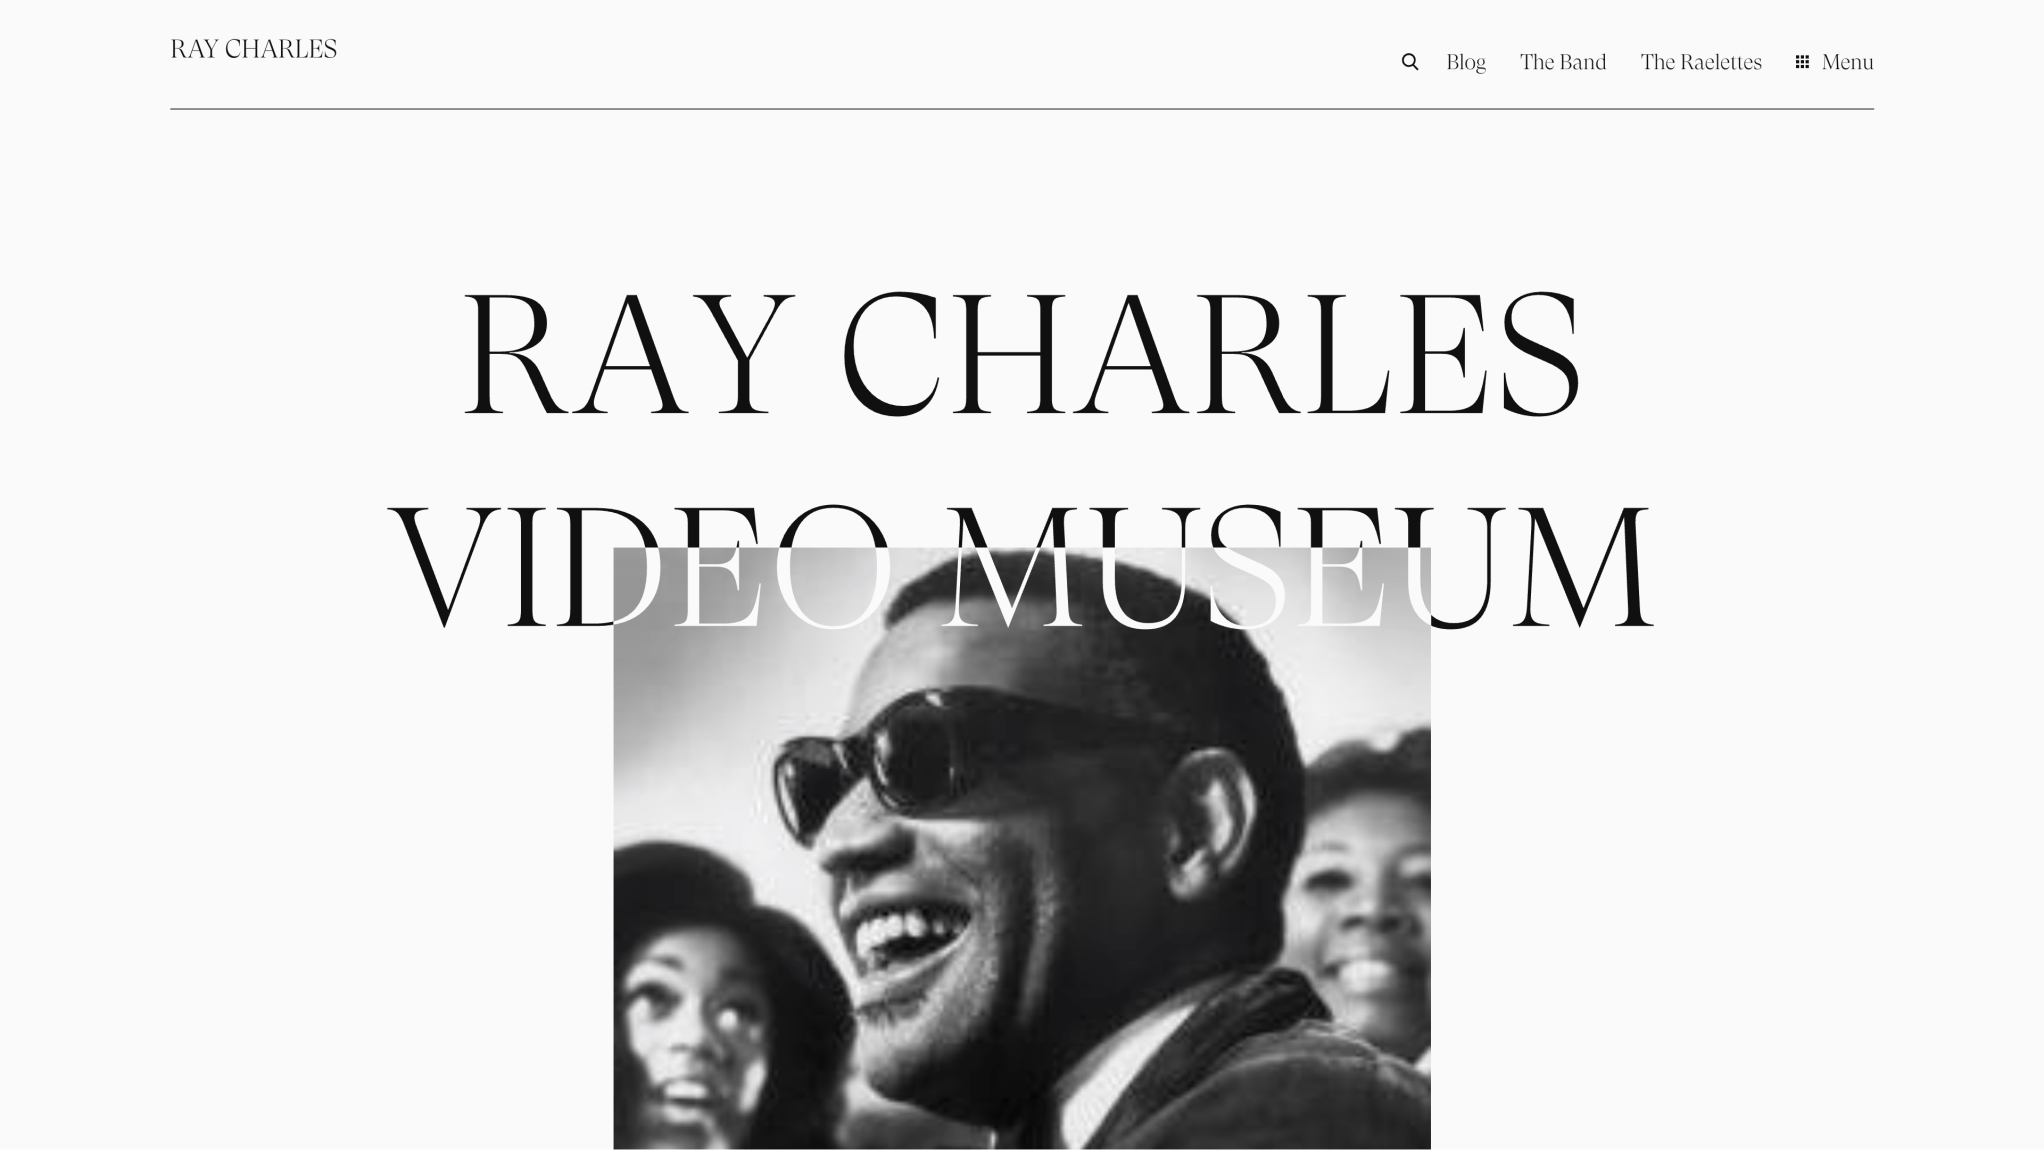 Ray Charles Video Museum